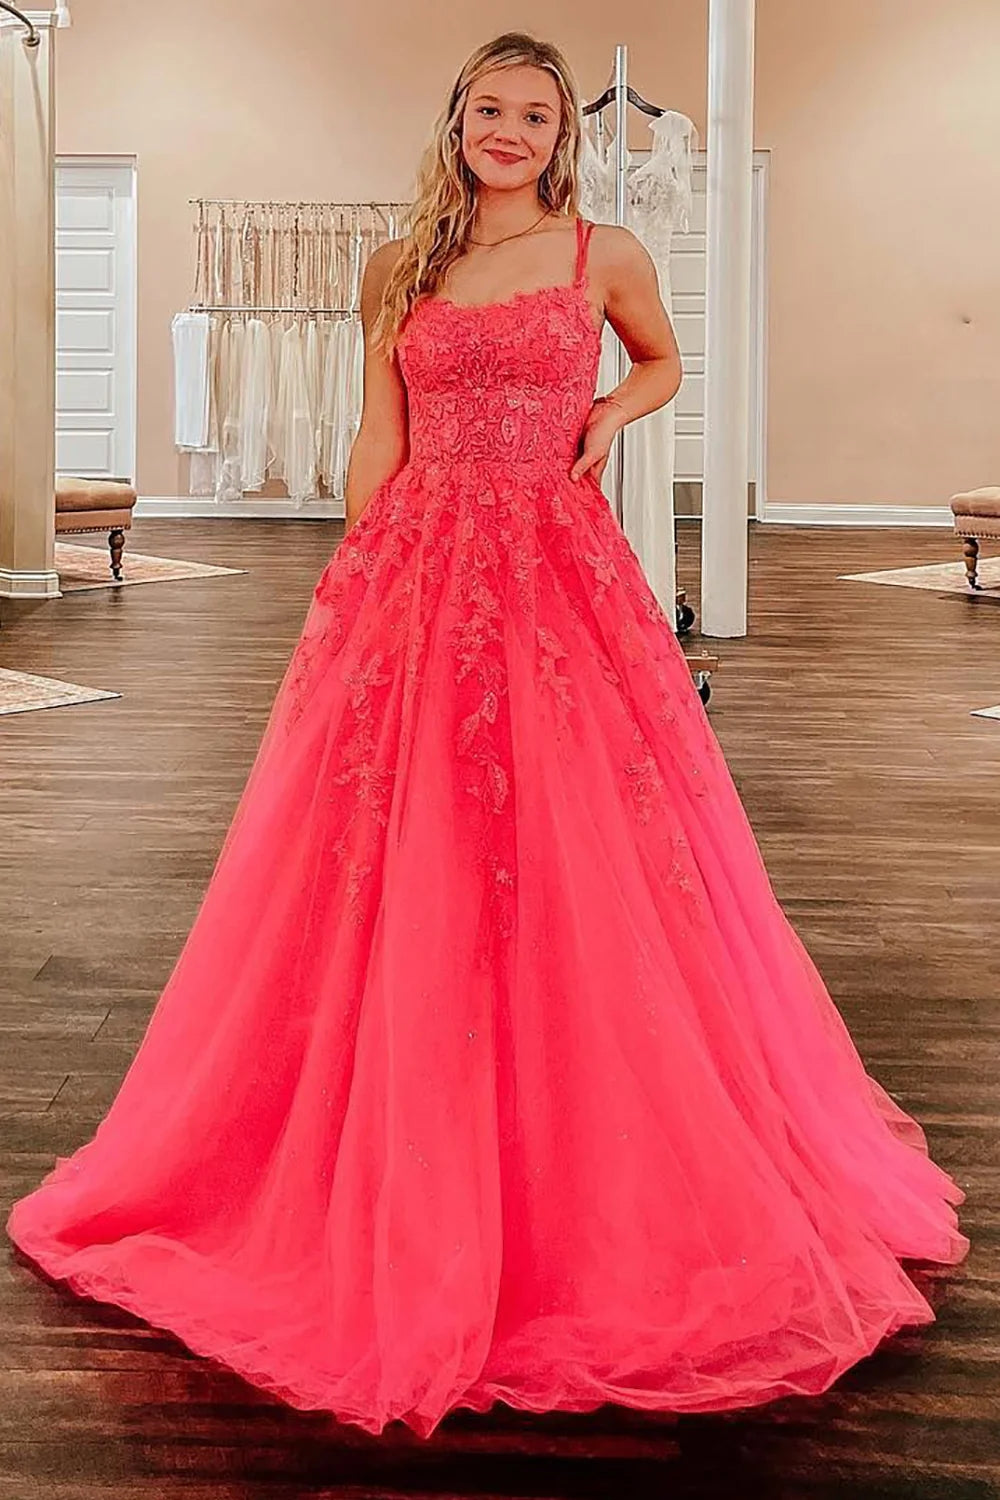 Coral A-Line Prom Dress with Appliques MD092903